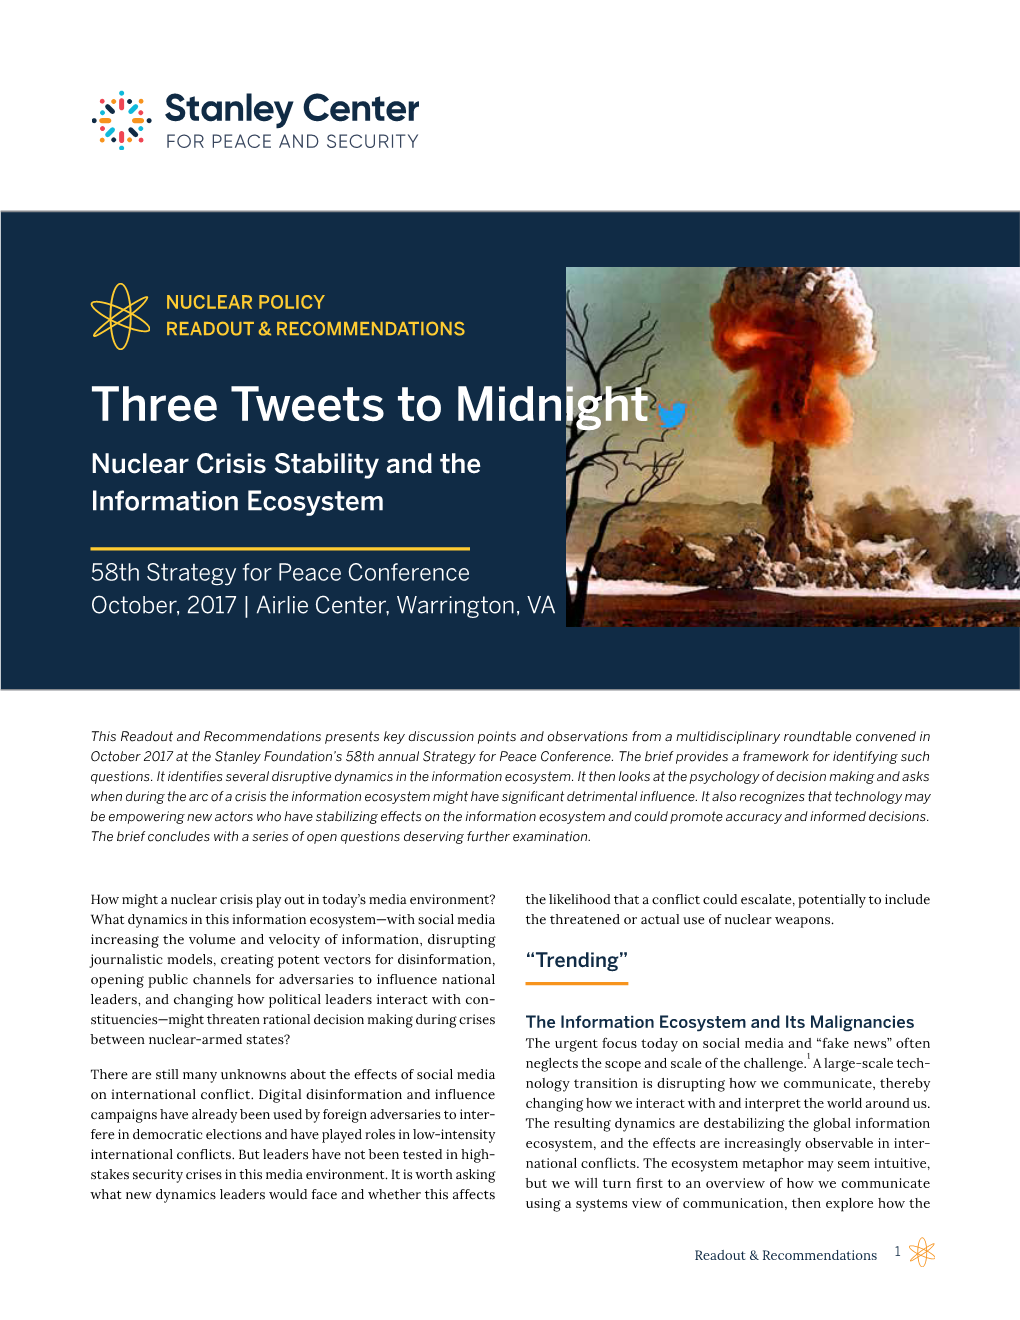 Three Tweets to Midnight Nuclear Crisis Stability and the Information Ecosystem